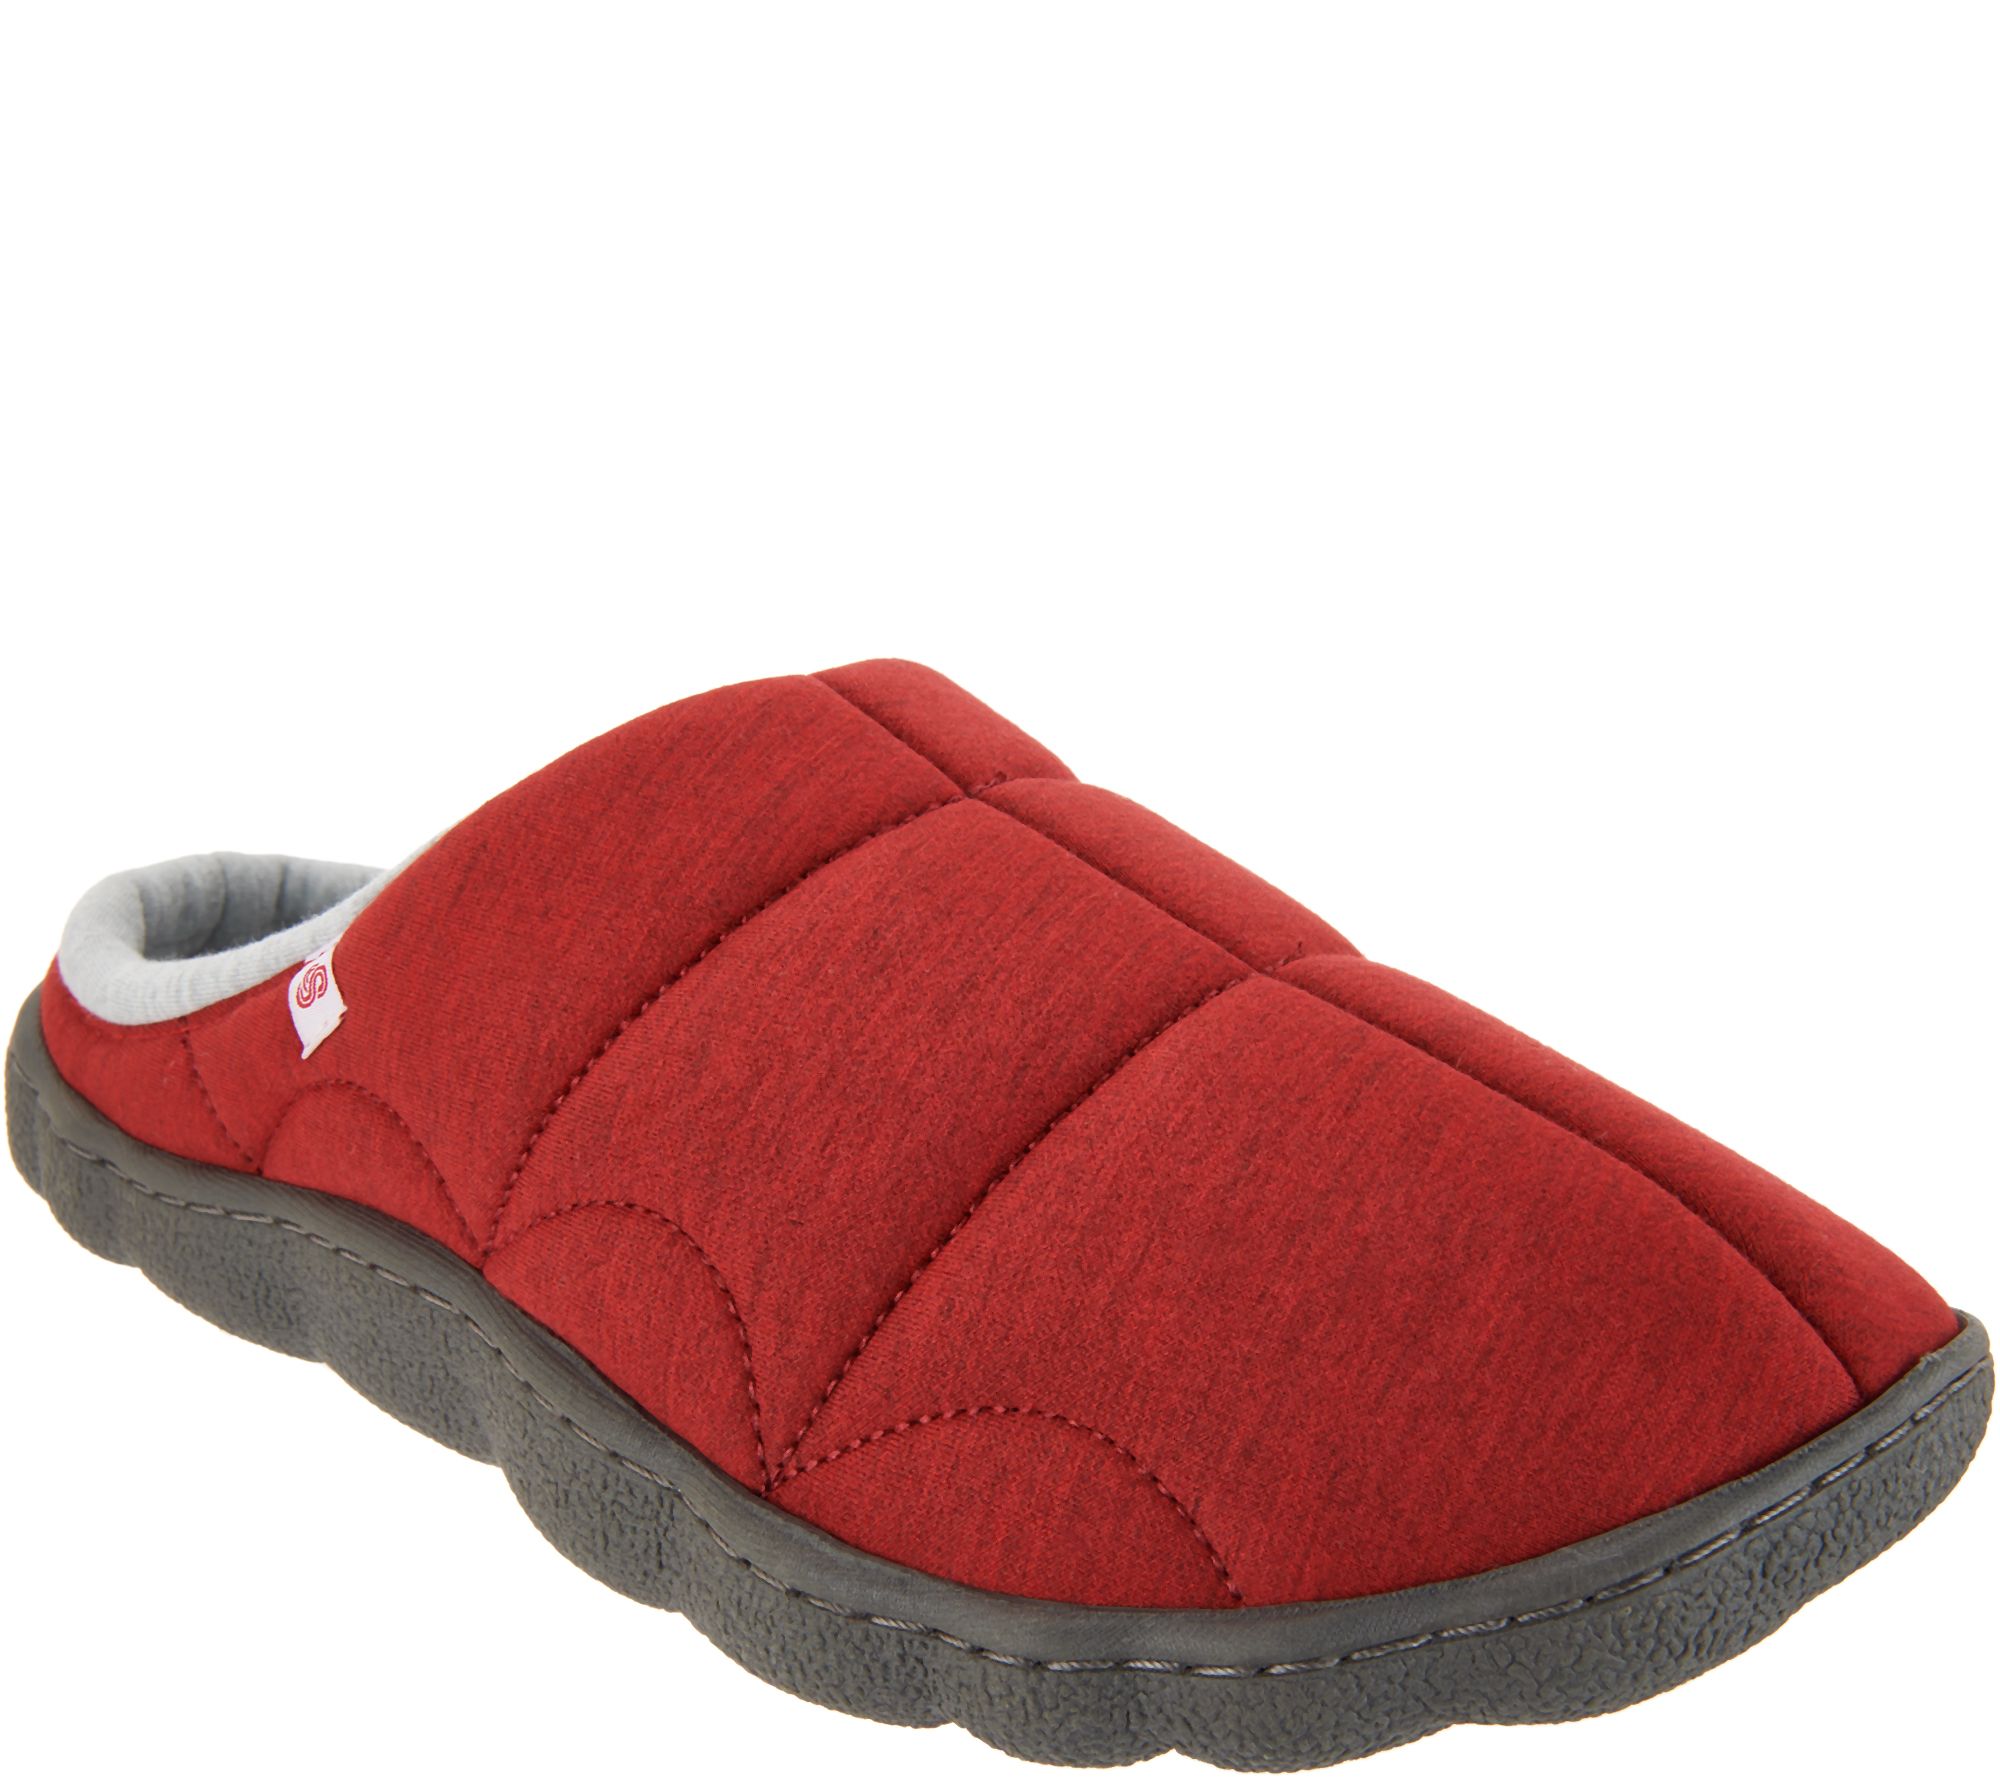 womens water shoes canada